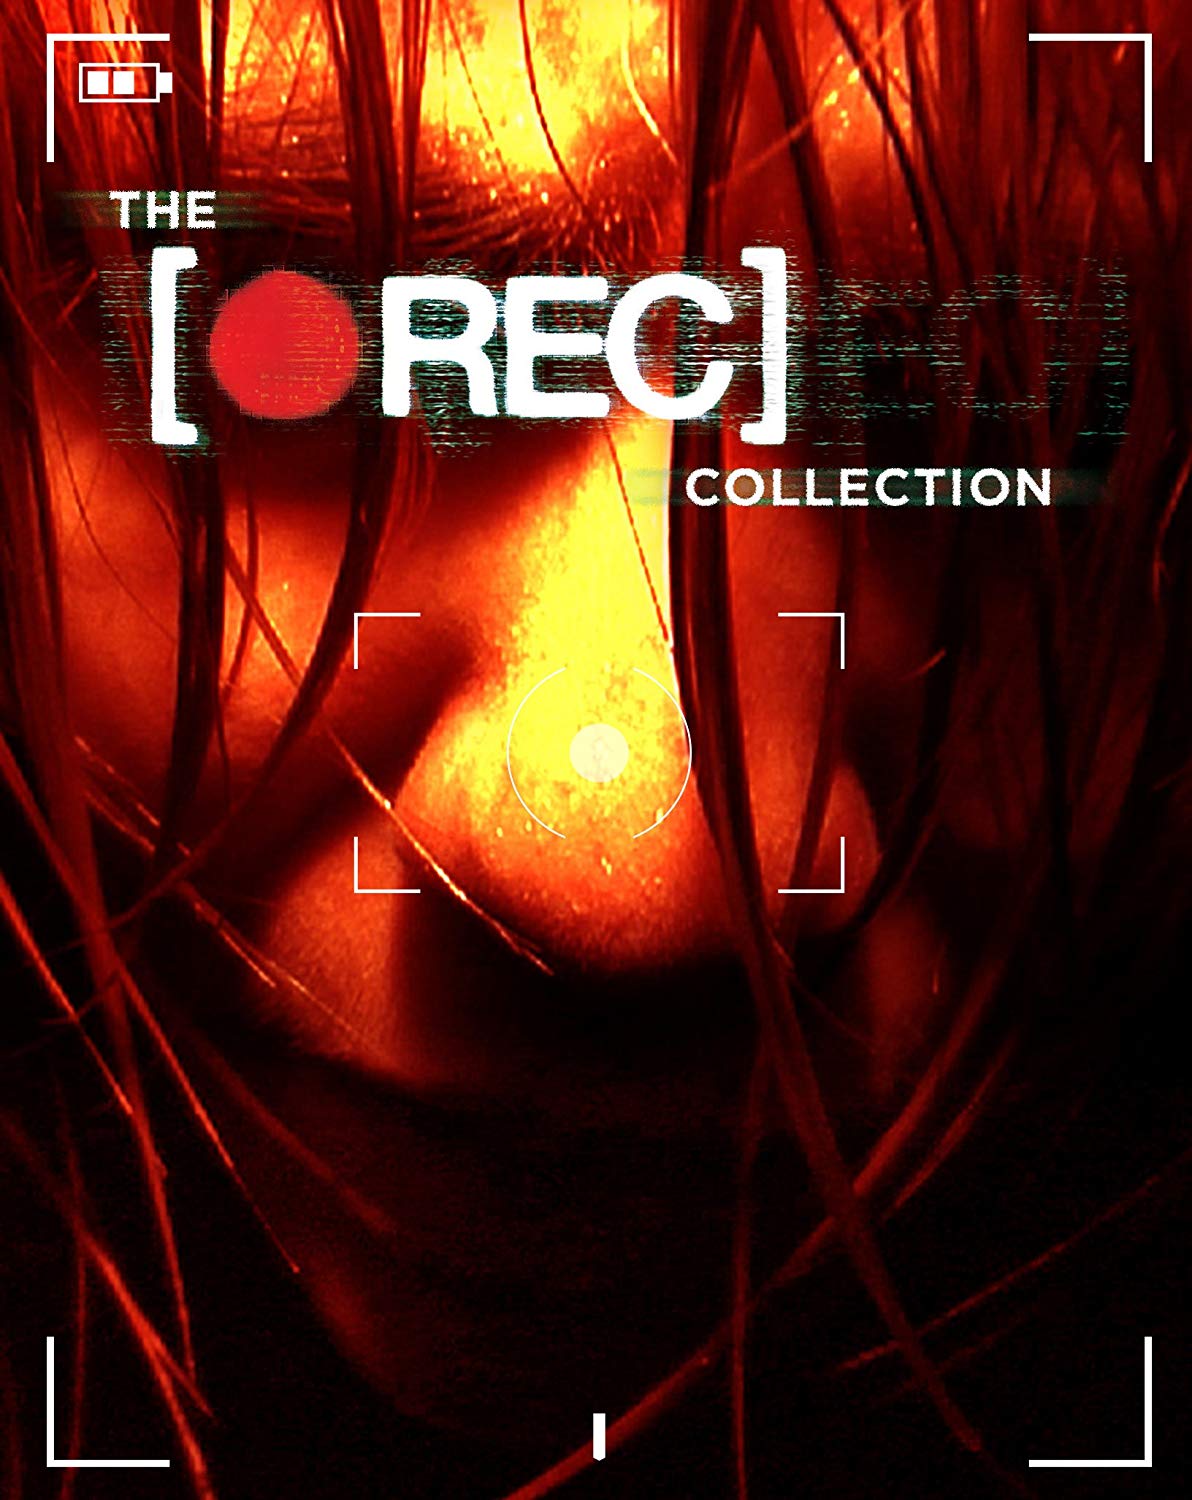 The [Rec] Collection Blu-Ray Blu-Ray